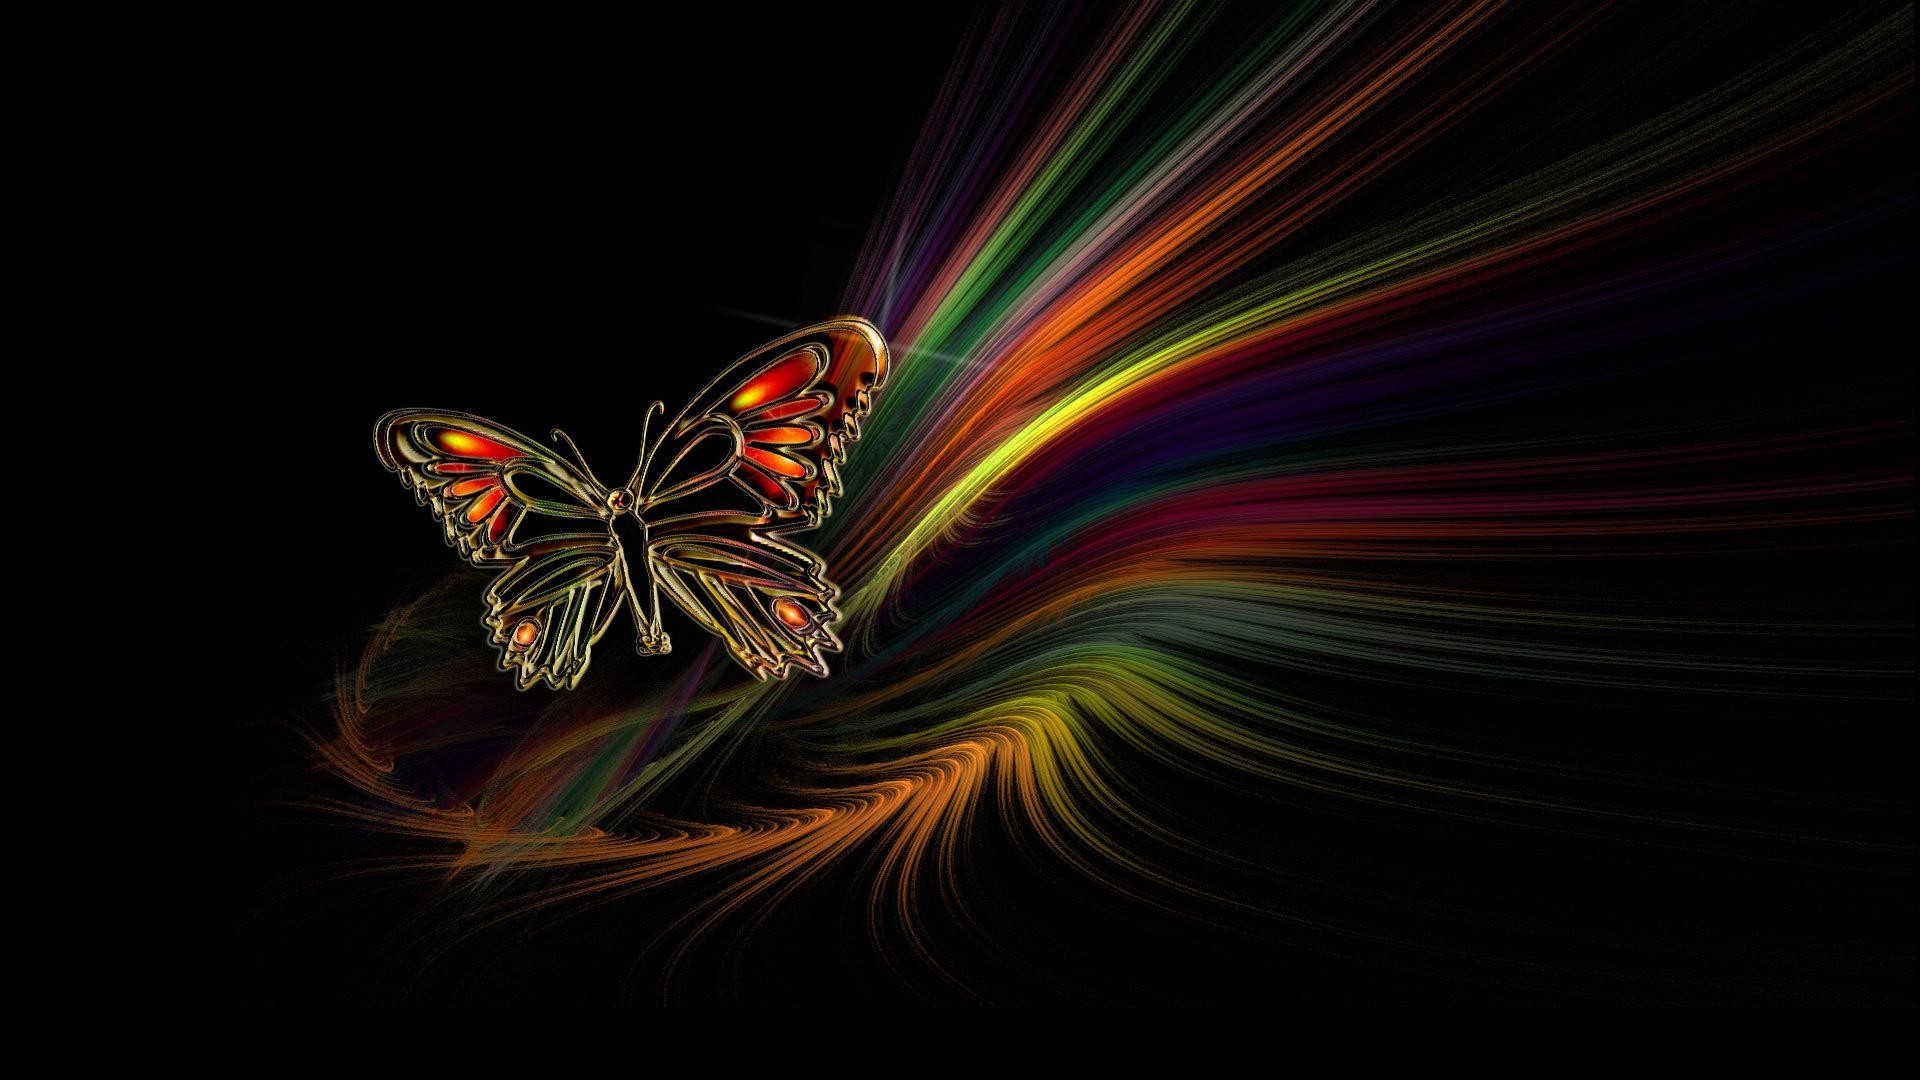 Digital Painting beautiful butterfly Poster Wallpaper on fine art paper  13x19 Fine Art Print  Art  Paintings posters in India  Buy art film  design movie music nature and educational paintingswallpapers